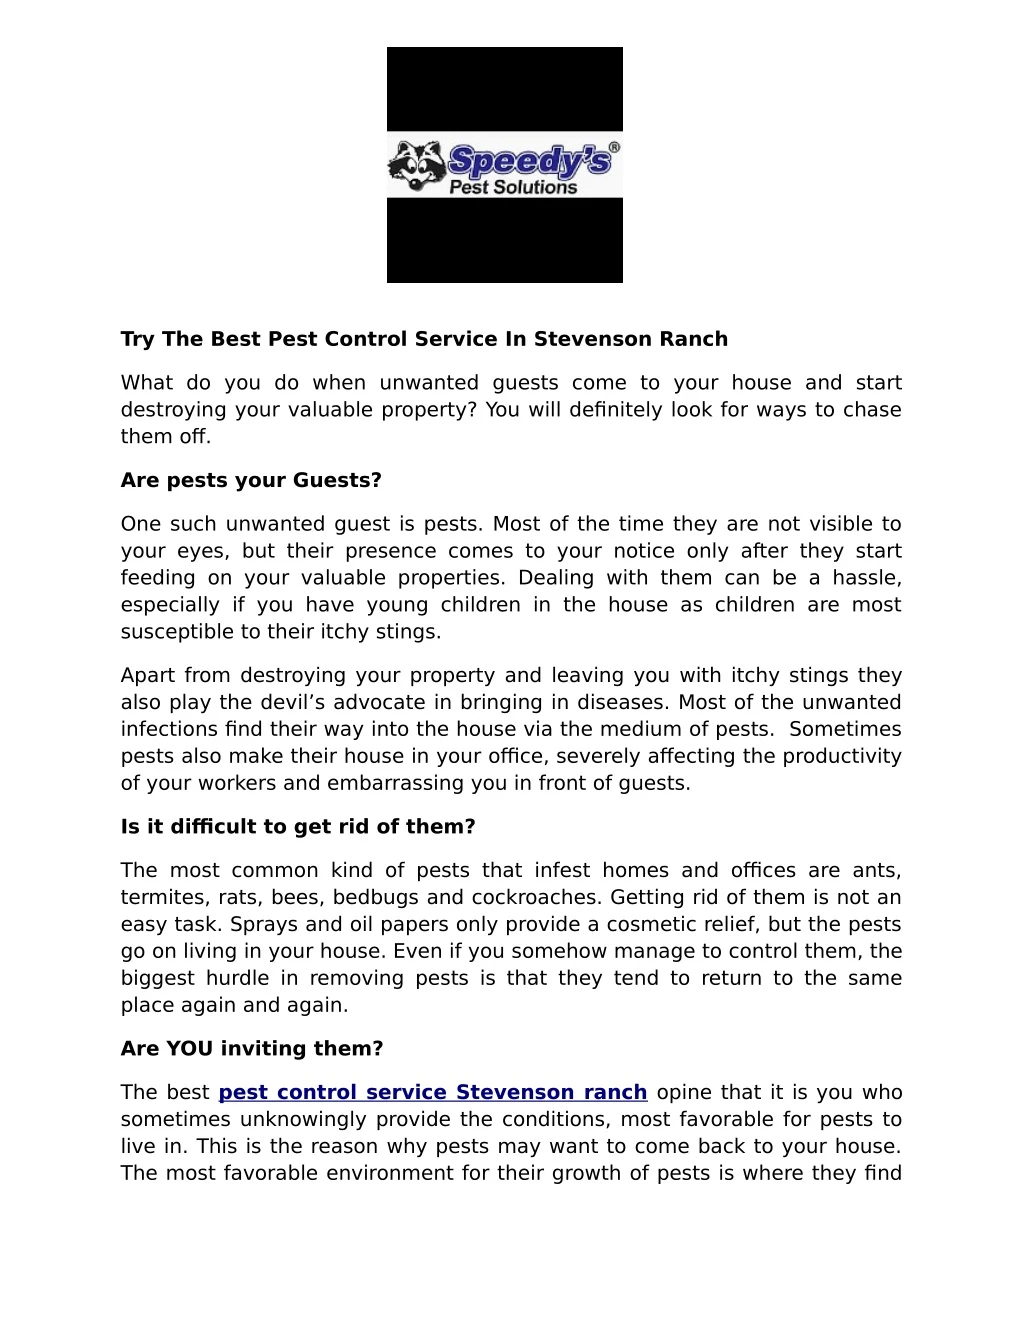 try the best pest control service in stevenson